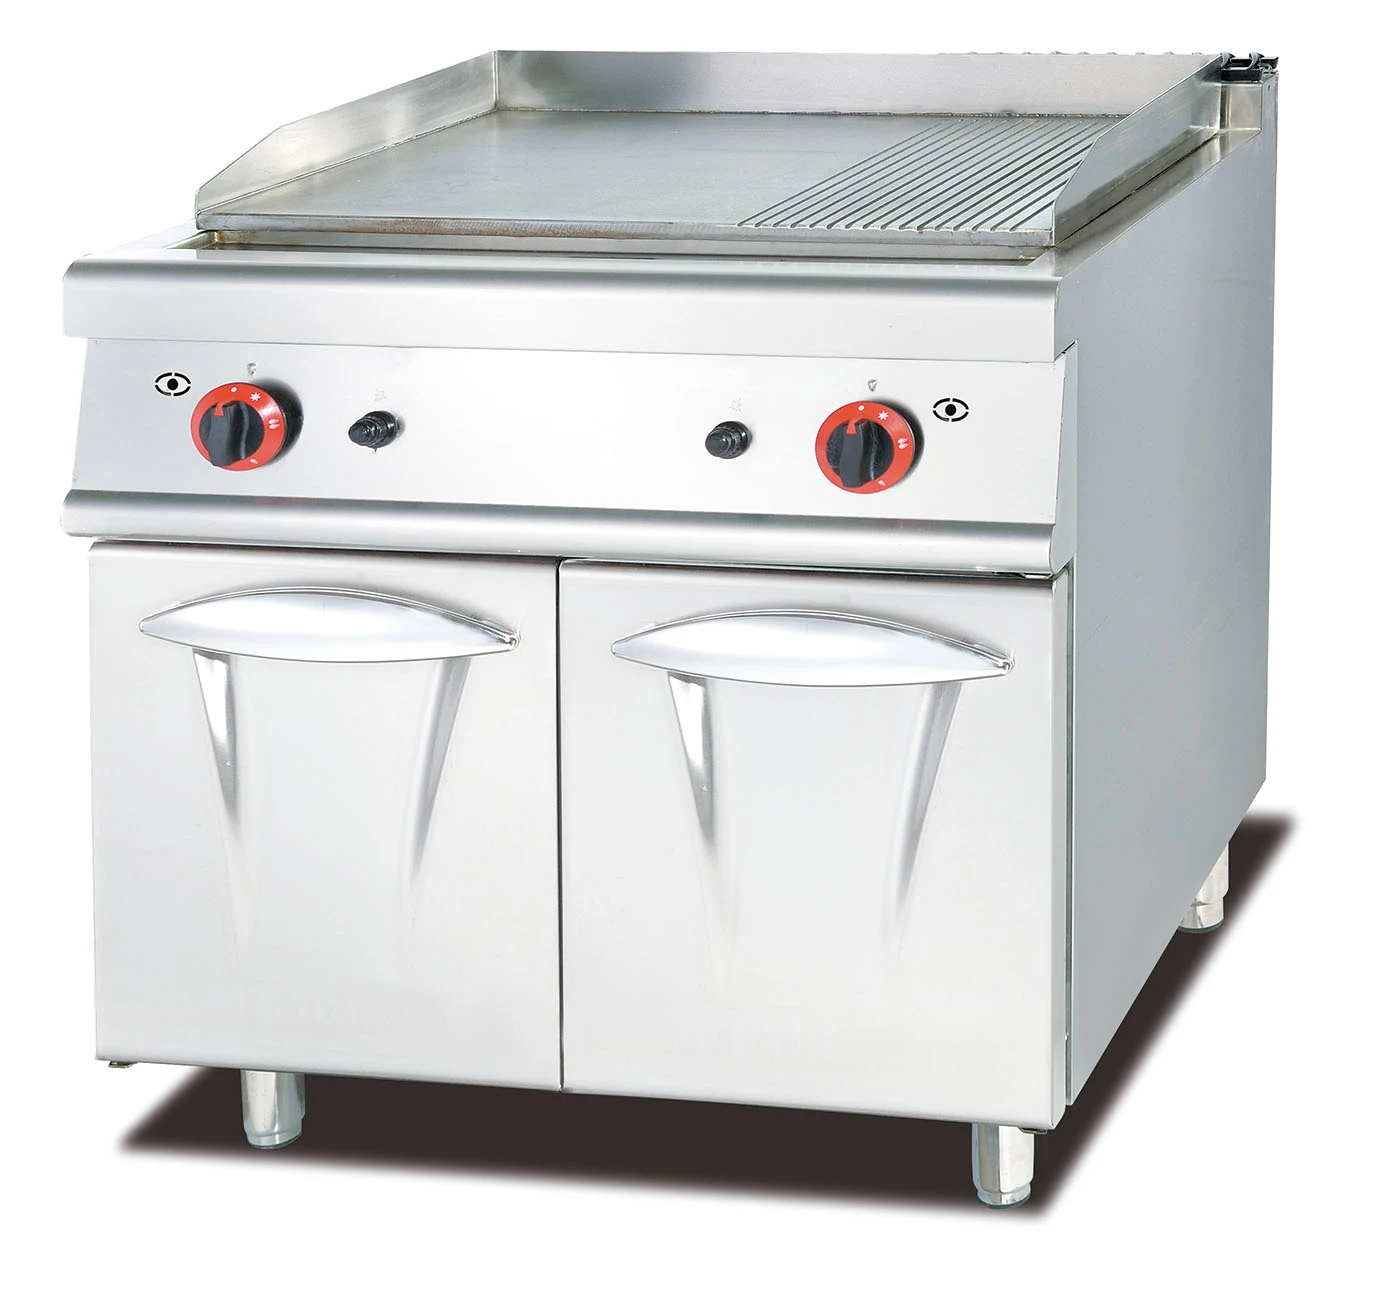 RM Commercial bbq restaurant kitchen stainless steel cooking gas electric burger griddle & stand grill pan flat plate heavy duty (1600424011312)